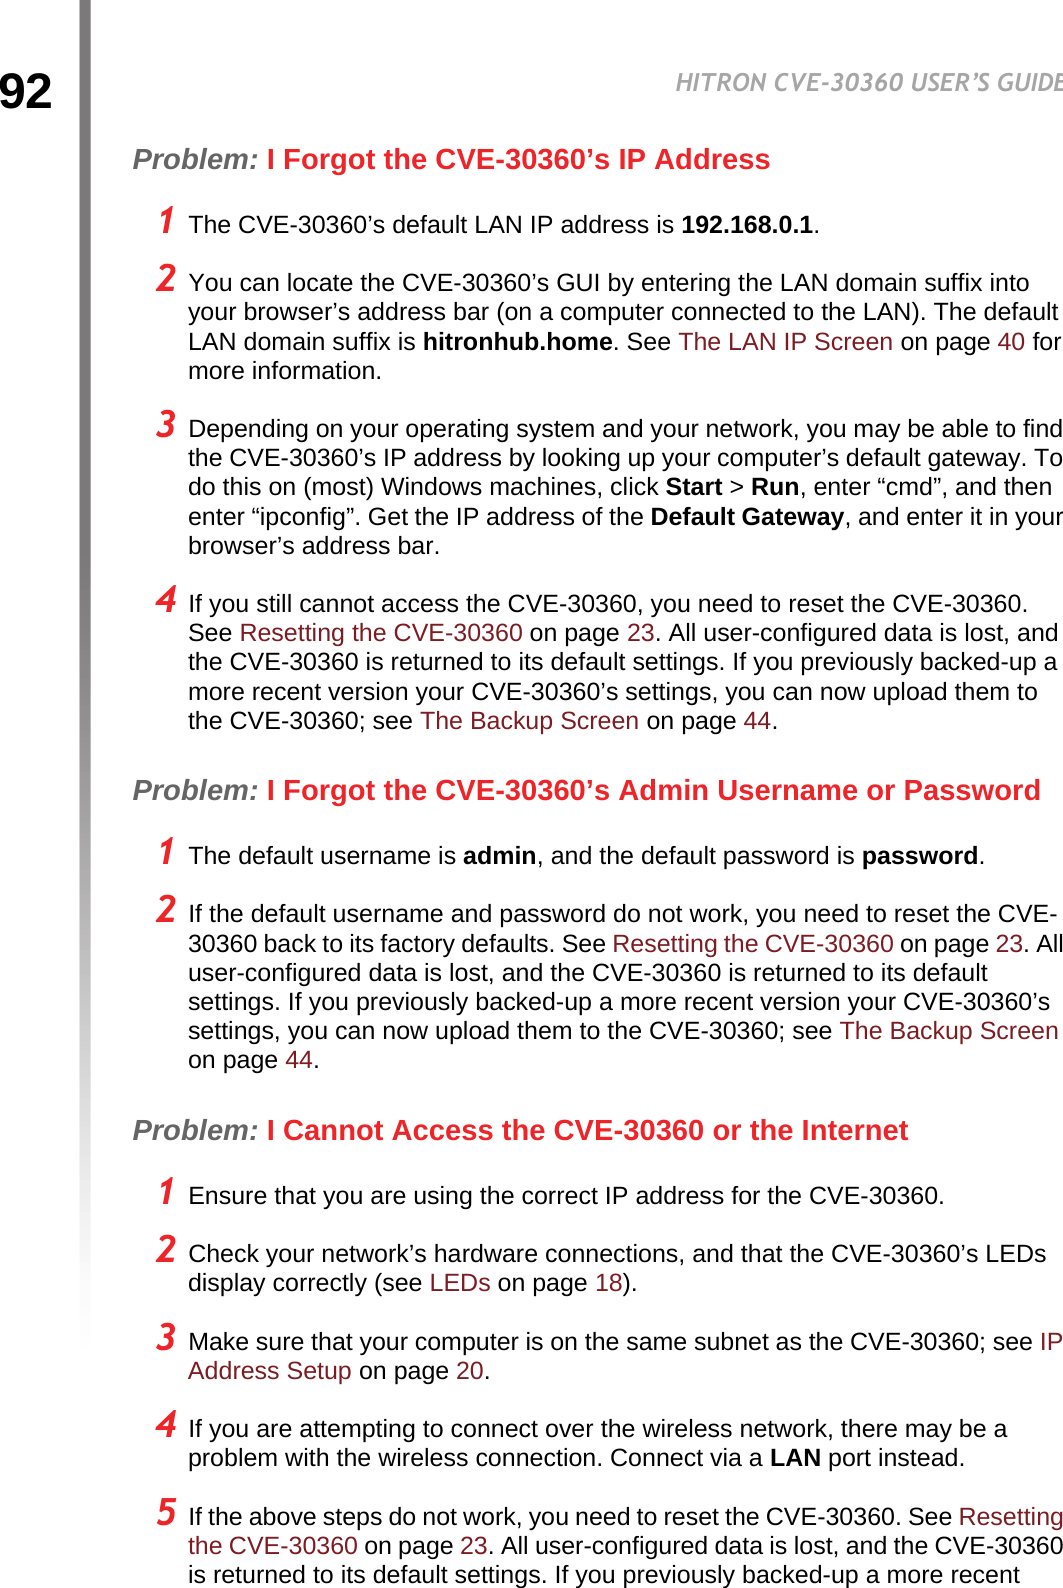 92HITRON CVE-30360 USER’S GUIDETROUBLESHOOTINGProblem: I Forgot the CVE-30360’s IP Address1 The CVE-30360’s default LAN IP address is 192.168.0.1.2 You can locate the CVE-30360’s GUI by entering the LAN domain suffix into your browser’s address bar (on a computer connected to the LAN). The default LAN domain suffix is hitronhub.home. See The LAN IP Screen on page 40 for more information.3 Depending on your operating system and your network, you may be able to find the CVE-30360’s IP address by looking up your computer’s default gateway. To do this on (most) Windows machines, click Start &gt; Run, enter “cmd”, and then enter “ipconfig”. Get the IP address of the Default Gateway, and enter it in your browser’s address bar.4 If you still cannot access the CVE-30360, you need to reset the CVE-30360. See Resetting the CVE-30360 on page 23. All user-configured data is lost, and the CVE-30360 is returned to its default settings. If you previously backed-up a more recent version your CVE-30360’s settings, you can now upload them to the CVE-30360; see The Backup Screen on page 44.Problem: I Forgot the CVE-30360’s Admin Username or Password1 The default username is admin, and the default password is password.2 If the default username and password do not work, you need to reset the CVE-30360 back to its factory defaults. See Resetting the CVE-30360 on page 23. All user-configured data is lost, and the CVE-30360 is returned to its default settings. If you previously backed-up a more recent version your CVE-30360’s settings, you can now upload them to the CVE-30360; see The Backup Screen on page 44.Problem: I Cannot Access the CVE-30360 or the Internet1 Ensure that you are using the correct IP address for the CVE-30360.2 Check your network’s hardware connections, and that the CVE-30360’s LEDs display correctly (see LEDs on page 18).3 Make sure that your computer is on the same subnet as the CVE-30360; see IP Address Setup on page 20.4 If you are attempting to connect over the wireless network, there may be a problem with the wireless connection. Connect via a LAN port instead.5 If the above steps do not work, you need to reset the CVE-30360. See Resetting the CVE-30360 on page 23. All user-configured data is lost, and the CVE-30360 is returned to its default settings. If you previously backed-up a more recent 